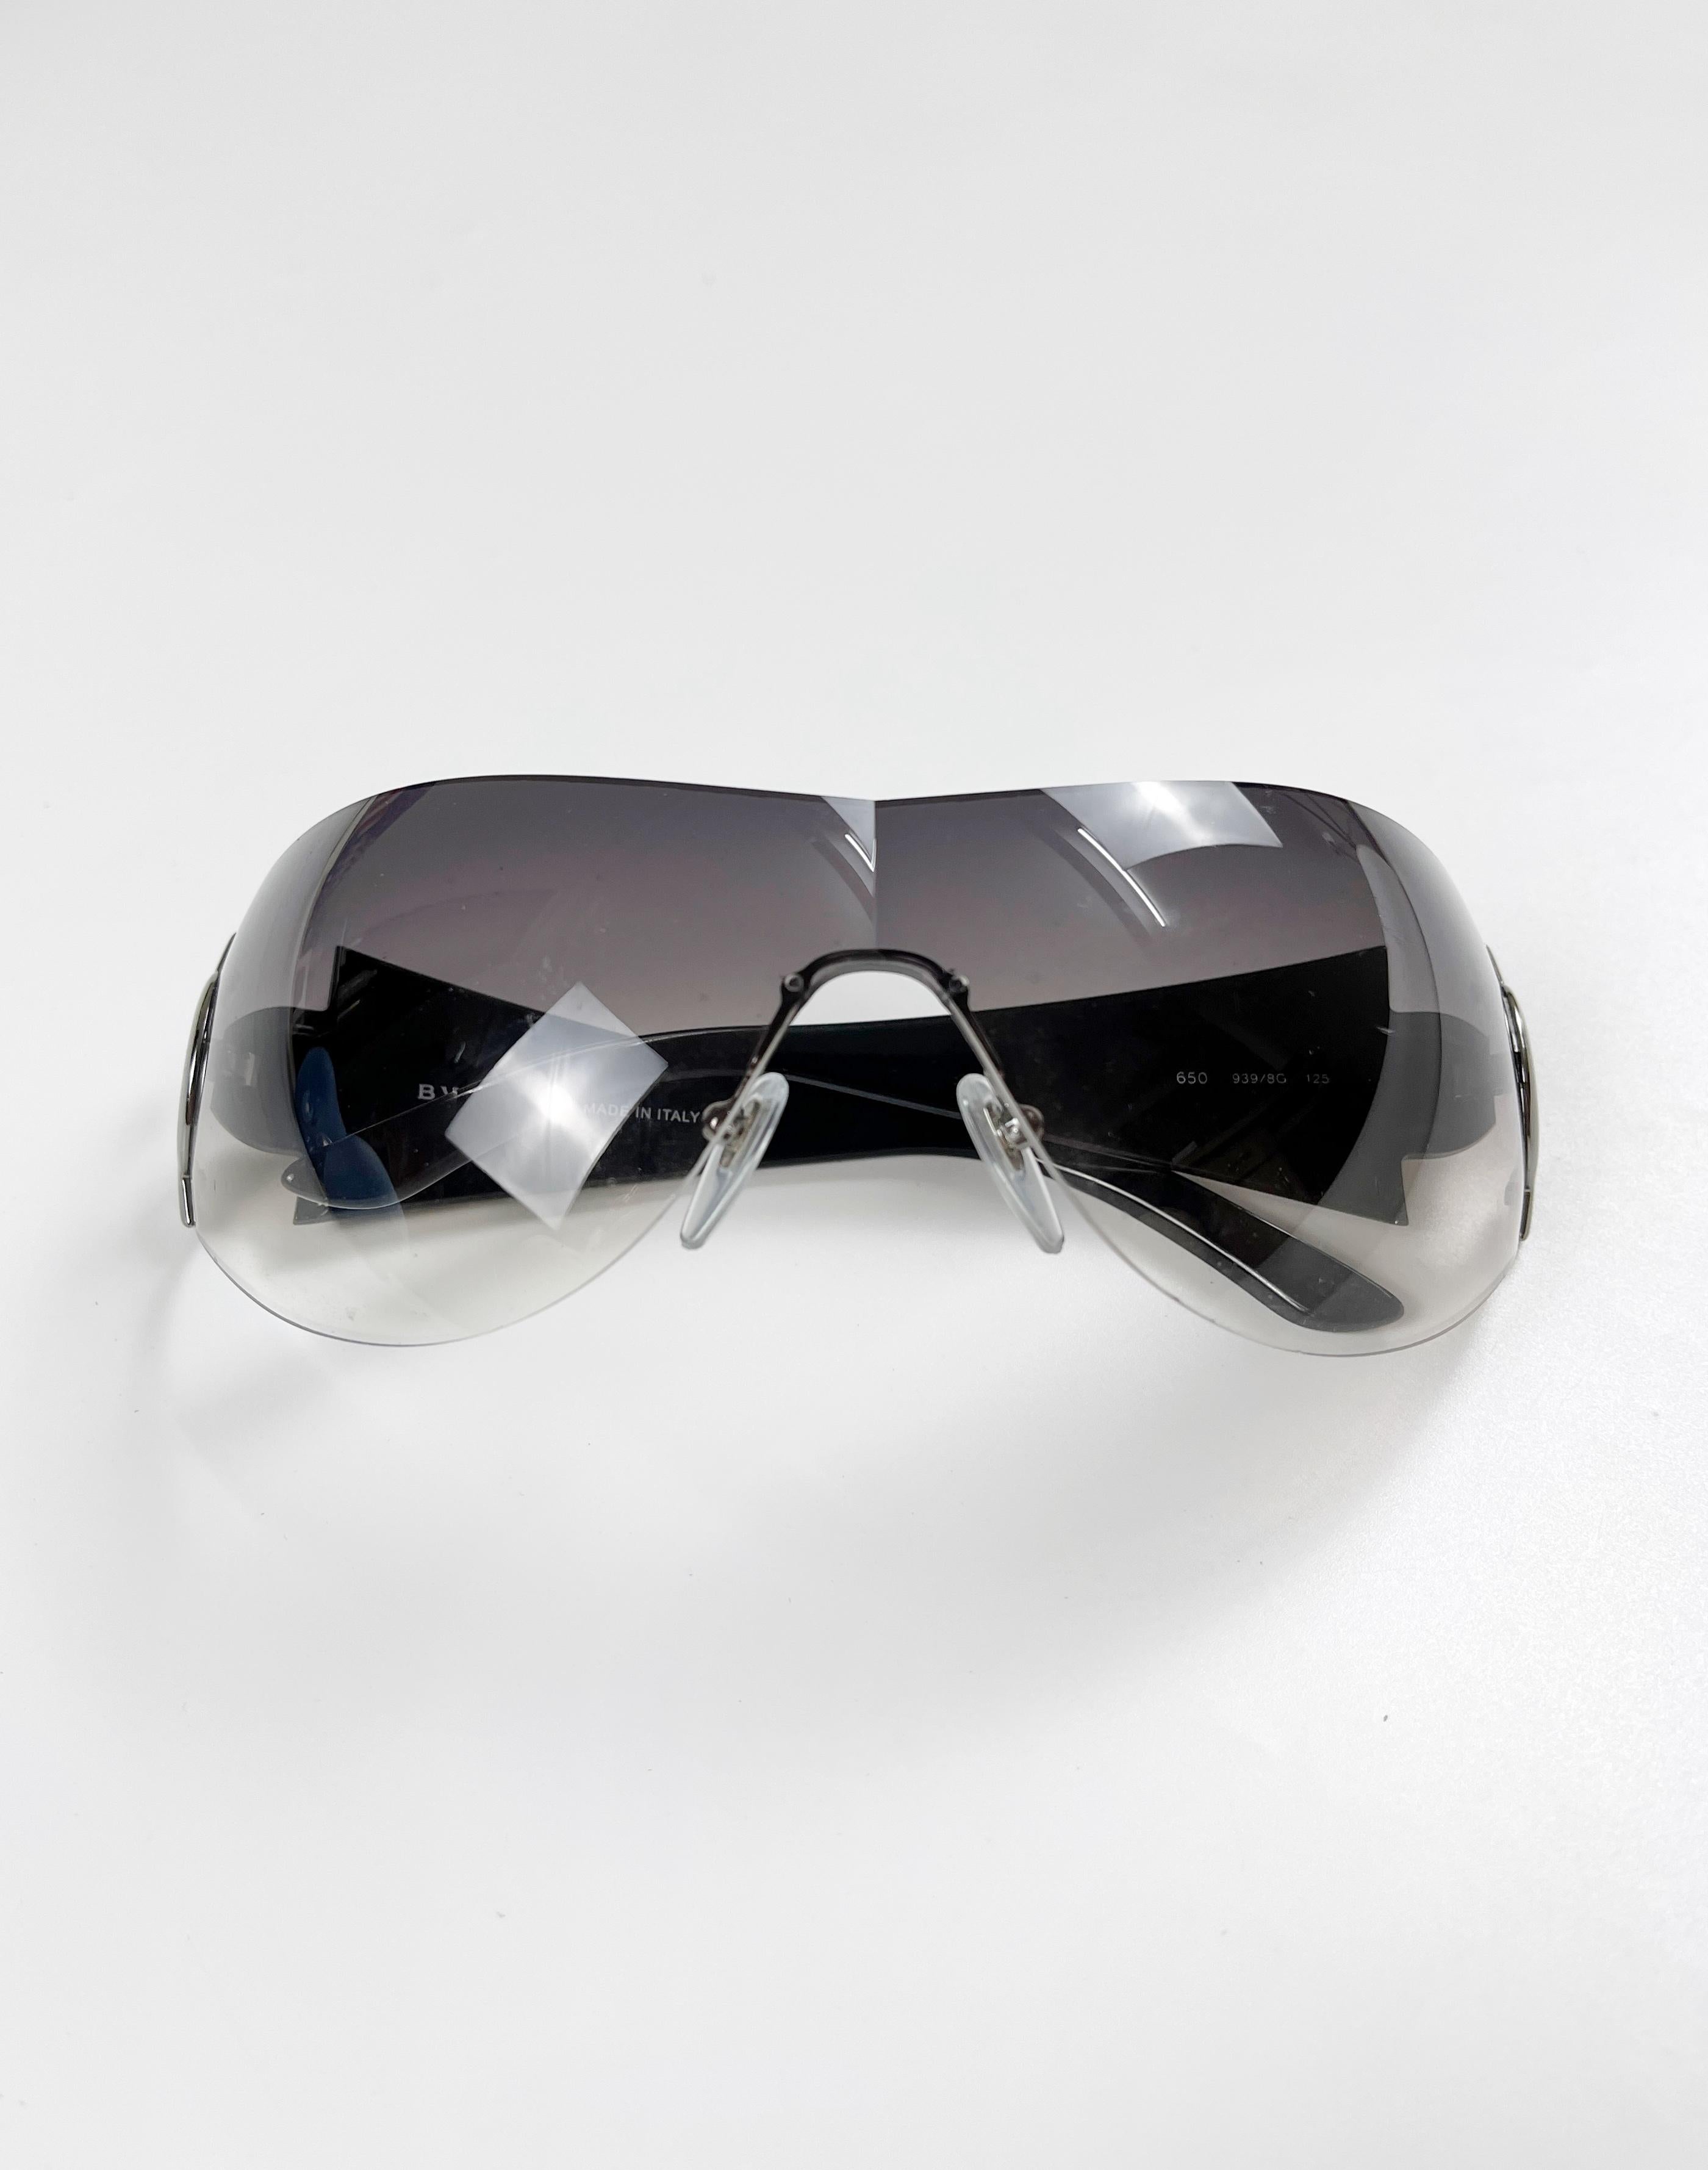 Bulgari Cat Eye Sunglasses In Excellent Condition For Sale In Seattle, WA